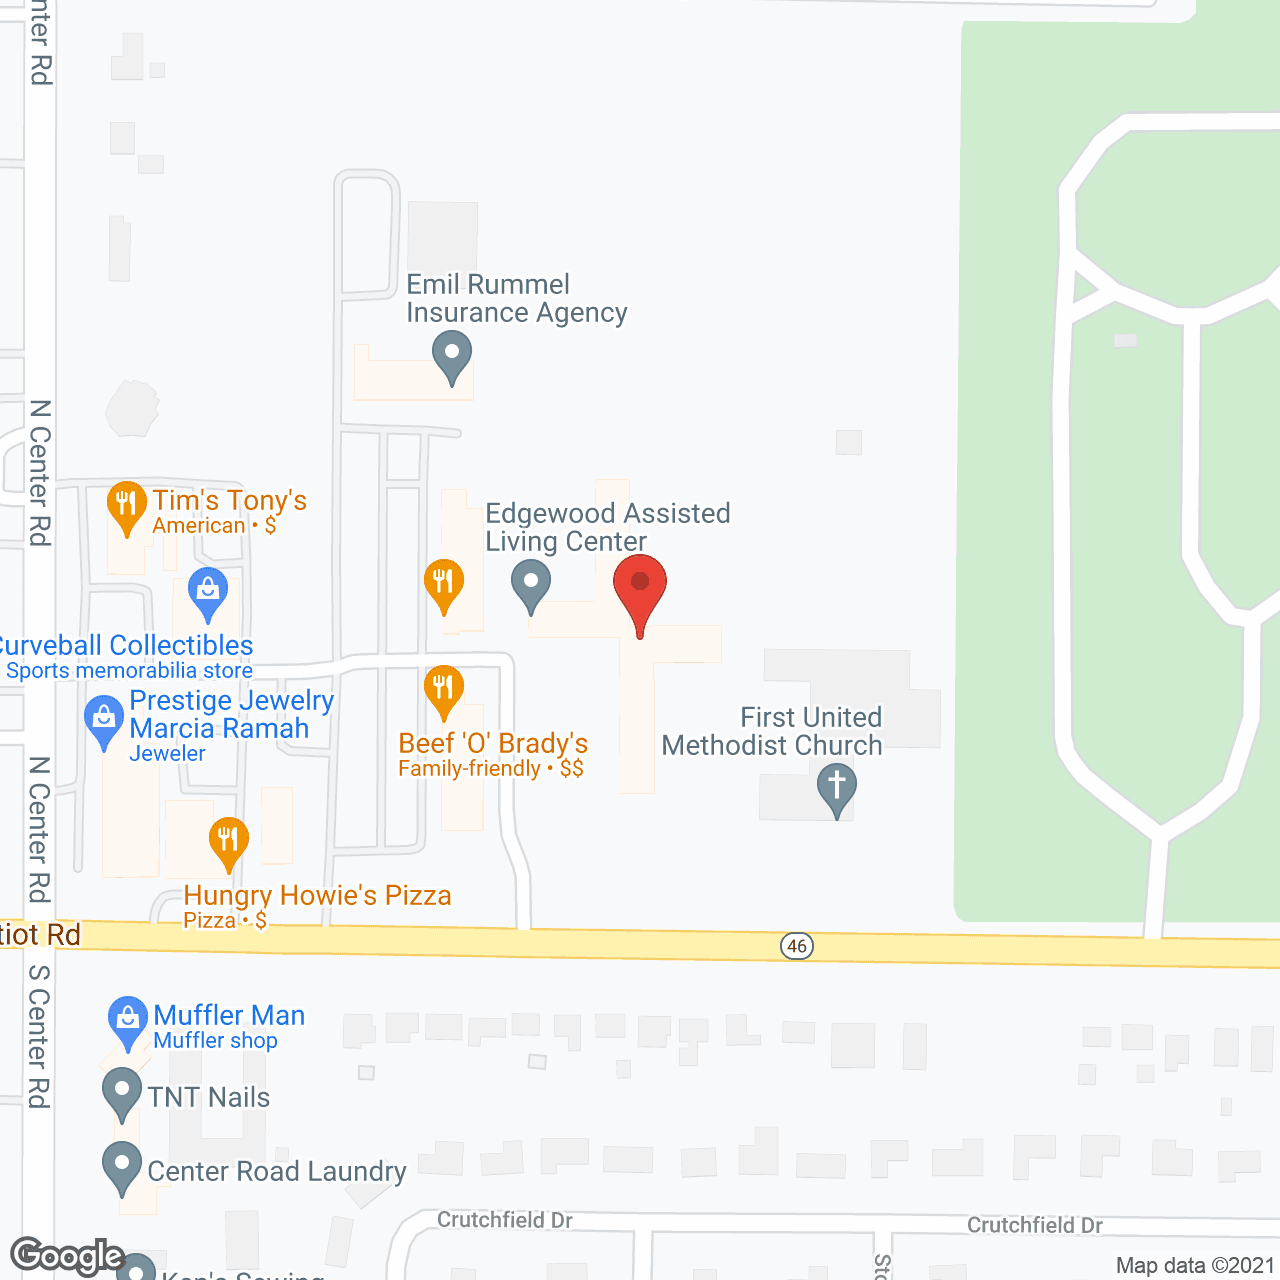 Edgewood Assisted Living Center in google map